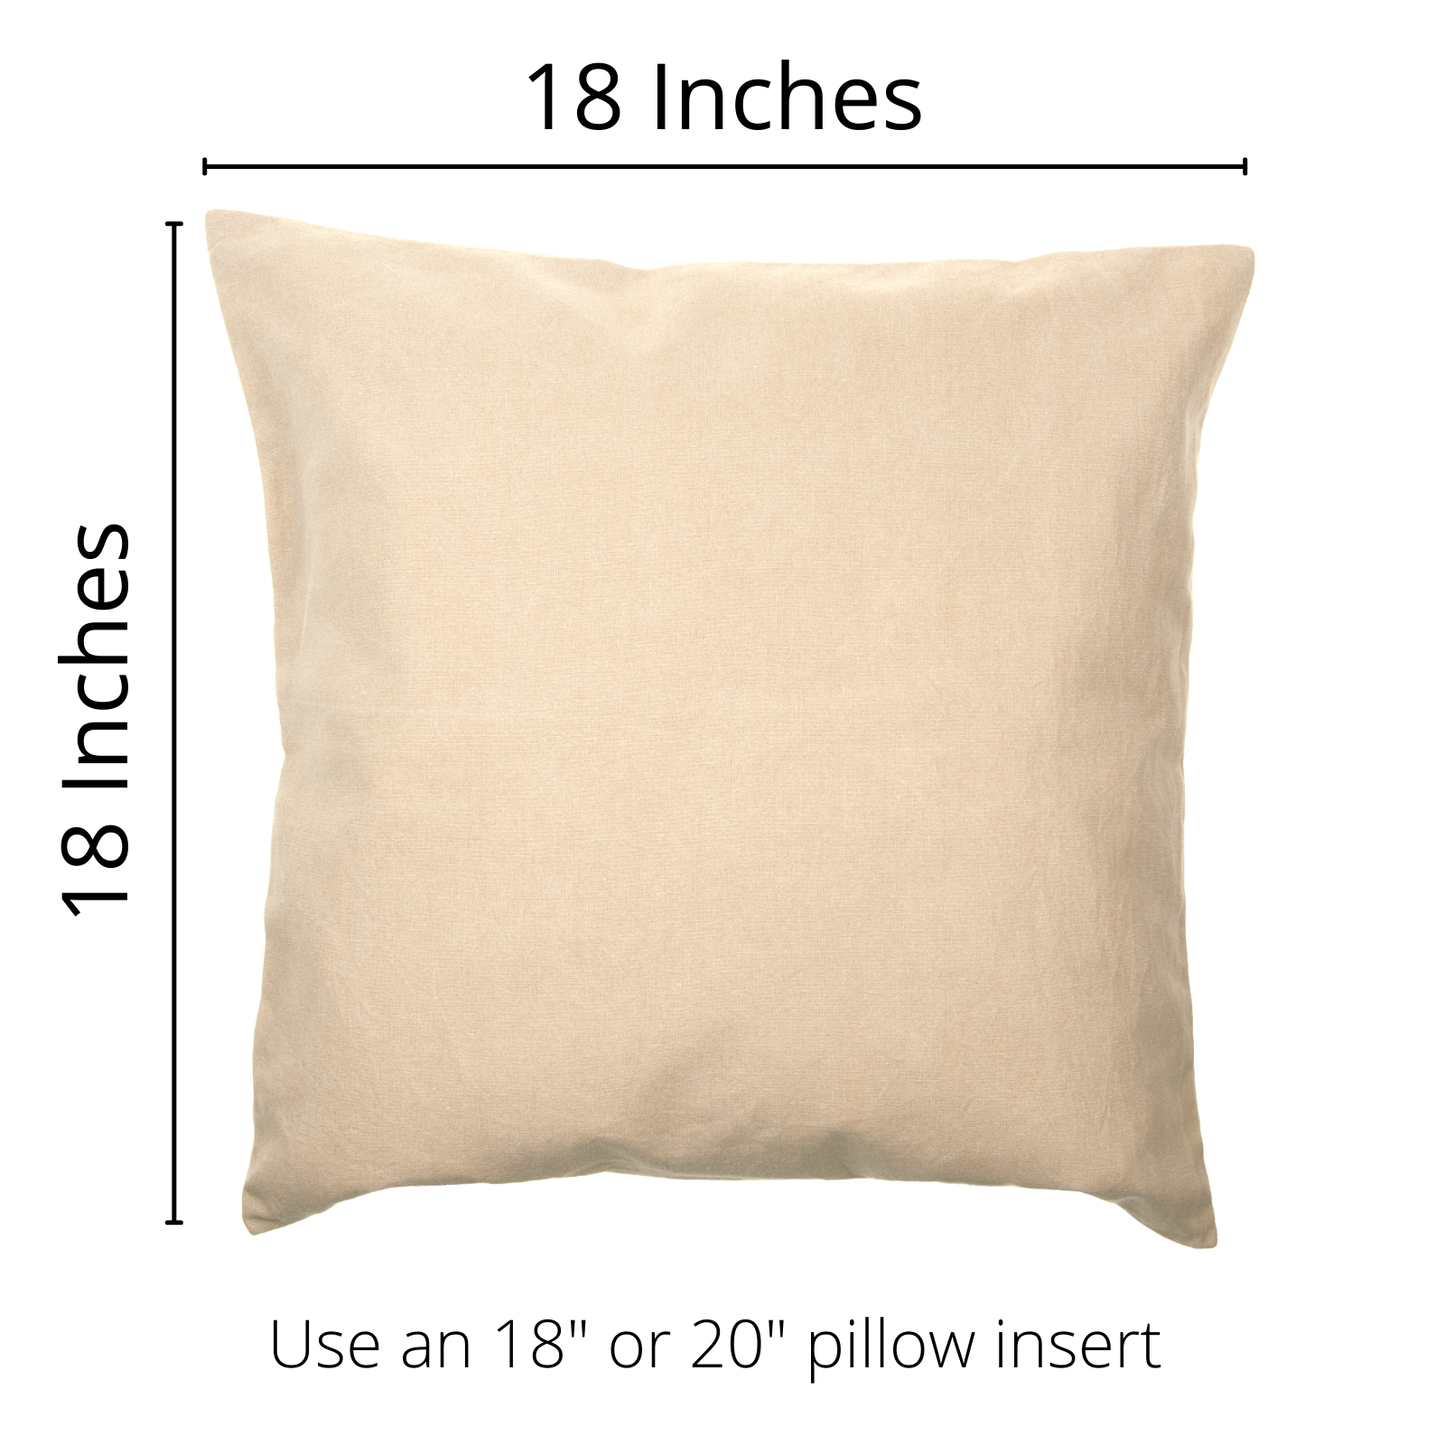 Luck in Gray Pillow Cover